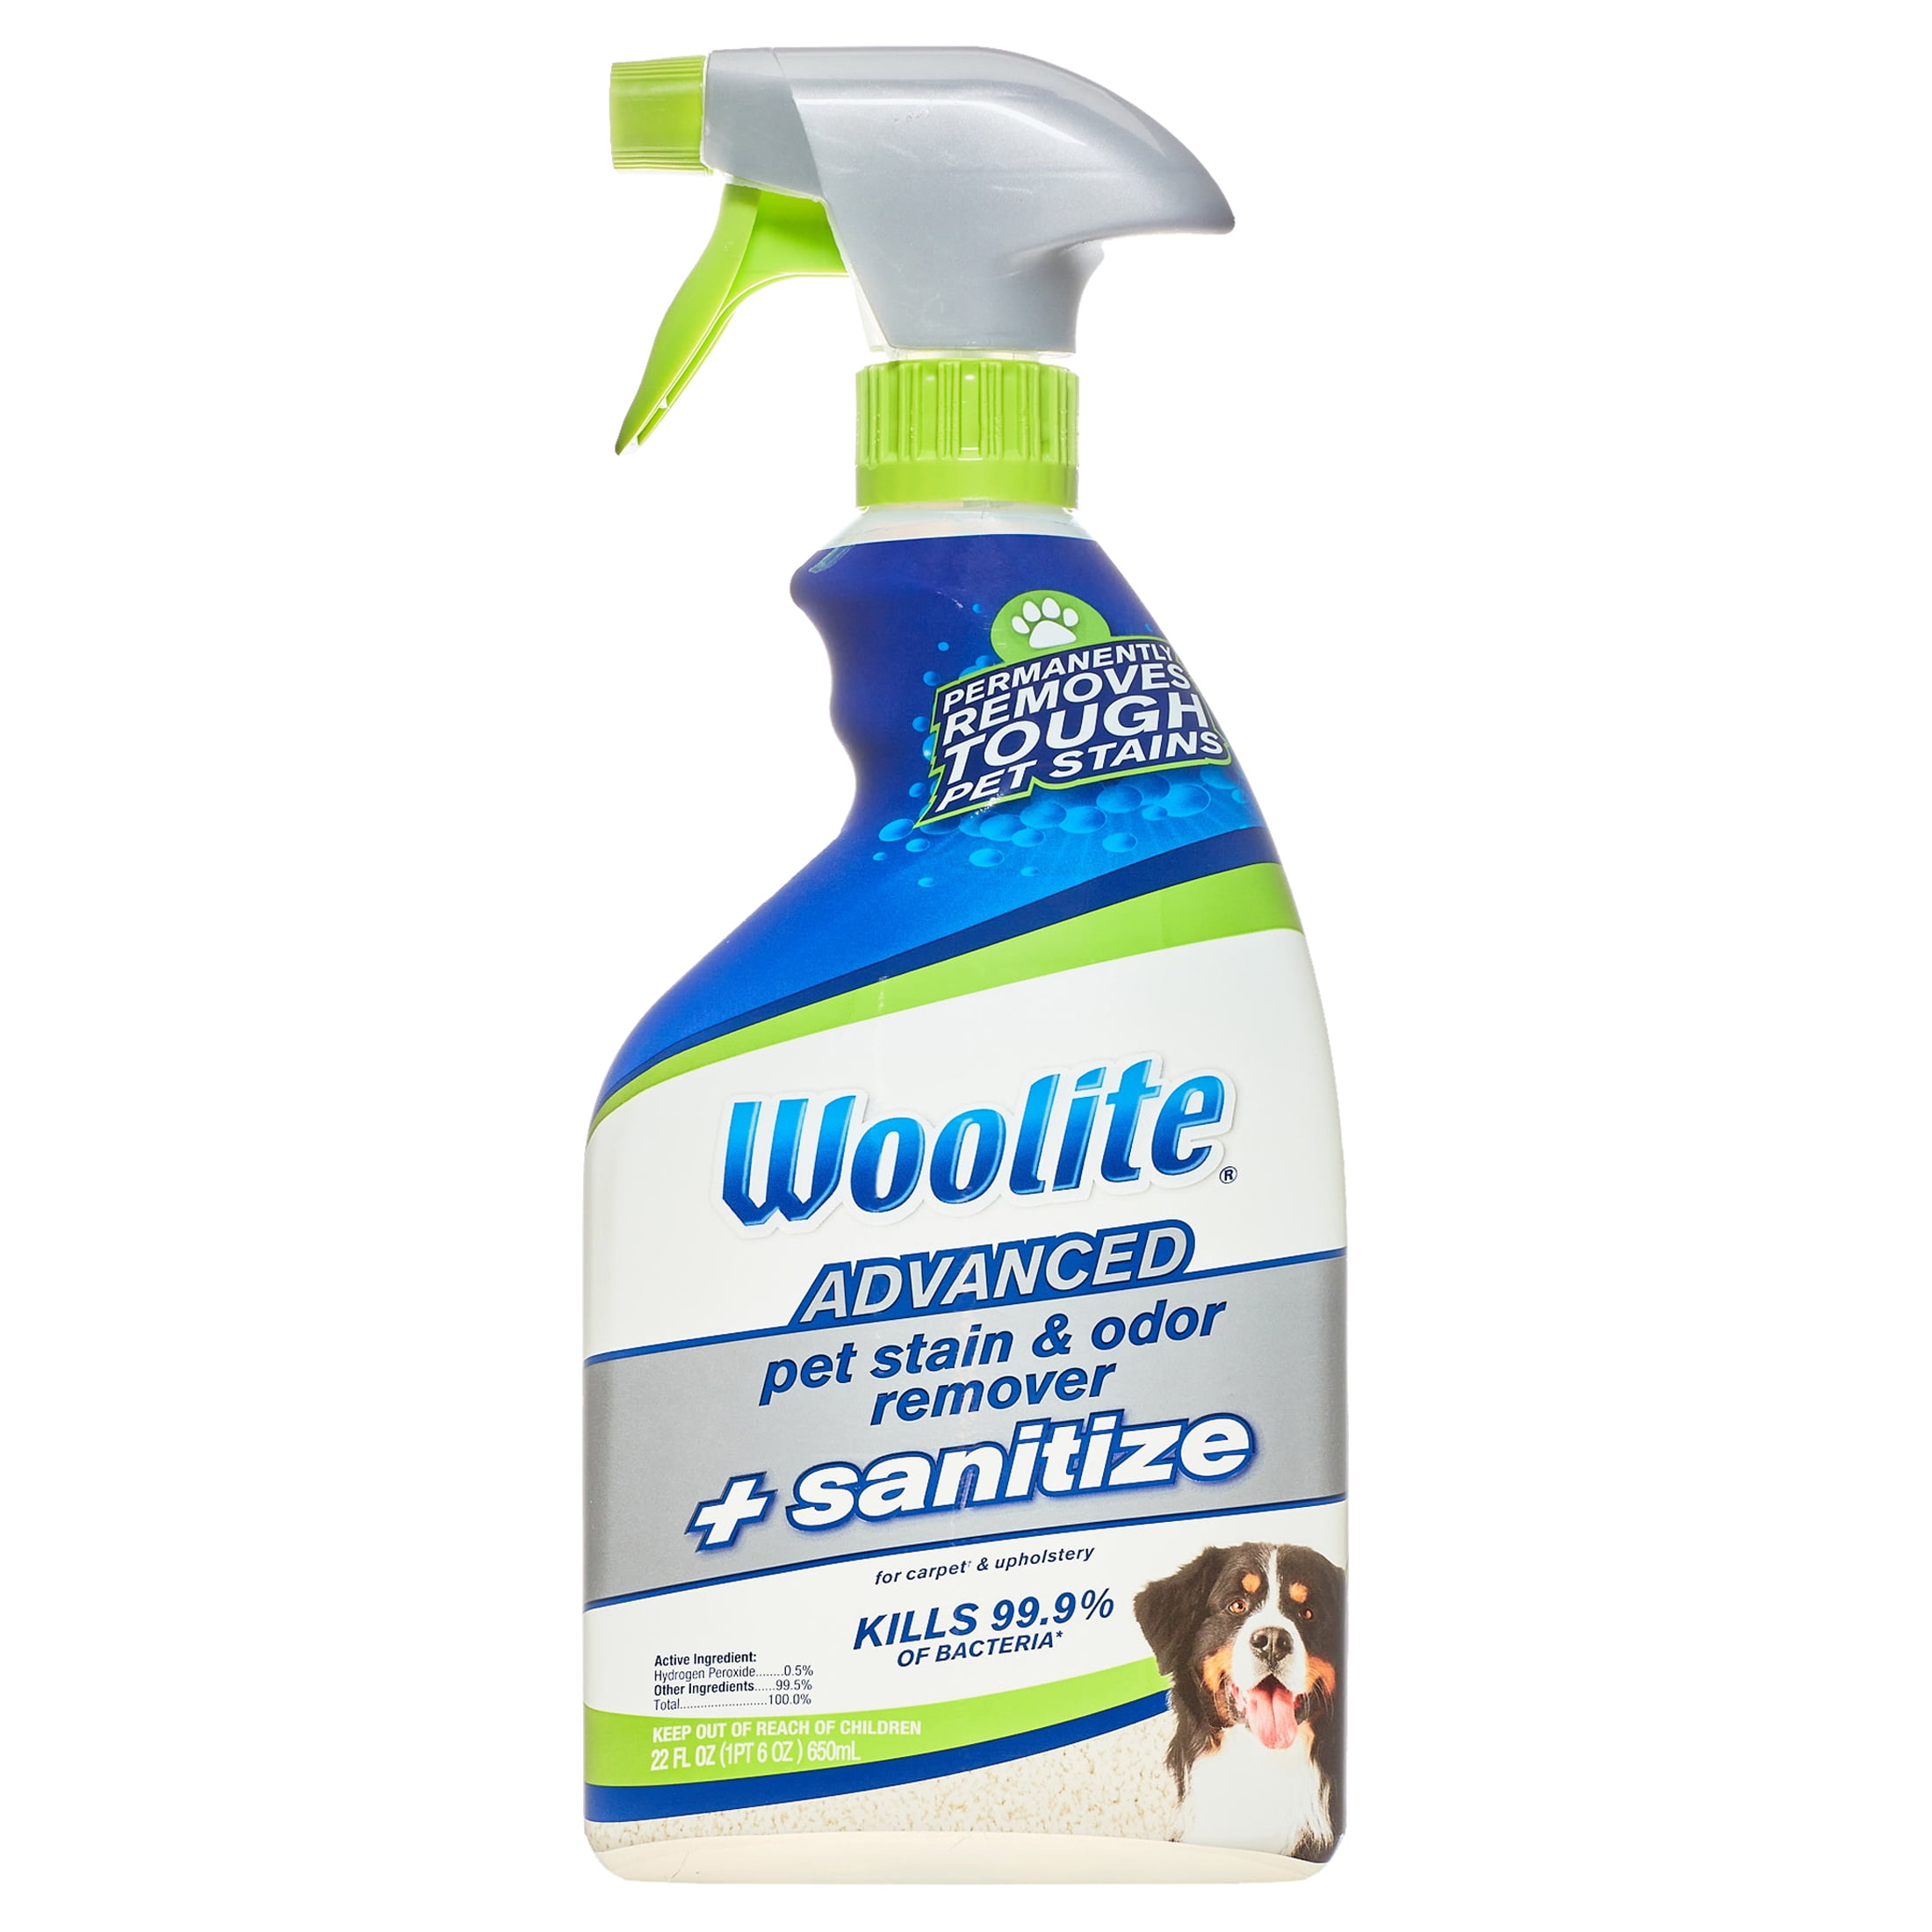 Woolite Carpet and Upholstery Cleaner Stain Remover 4 Pack